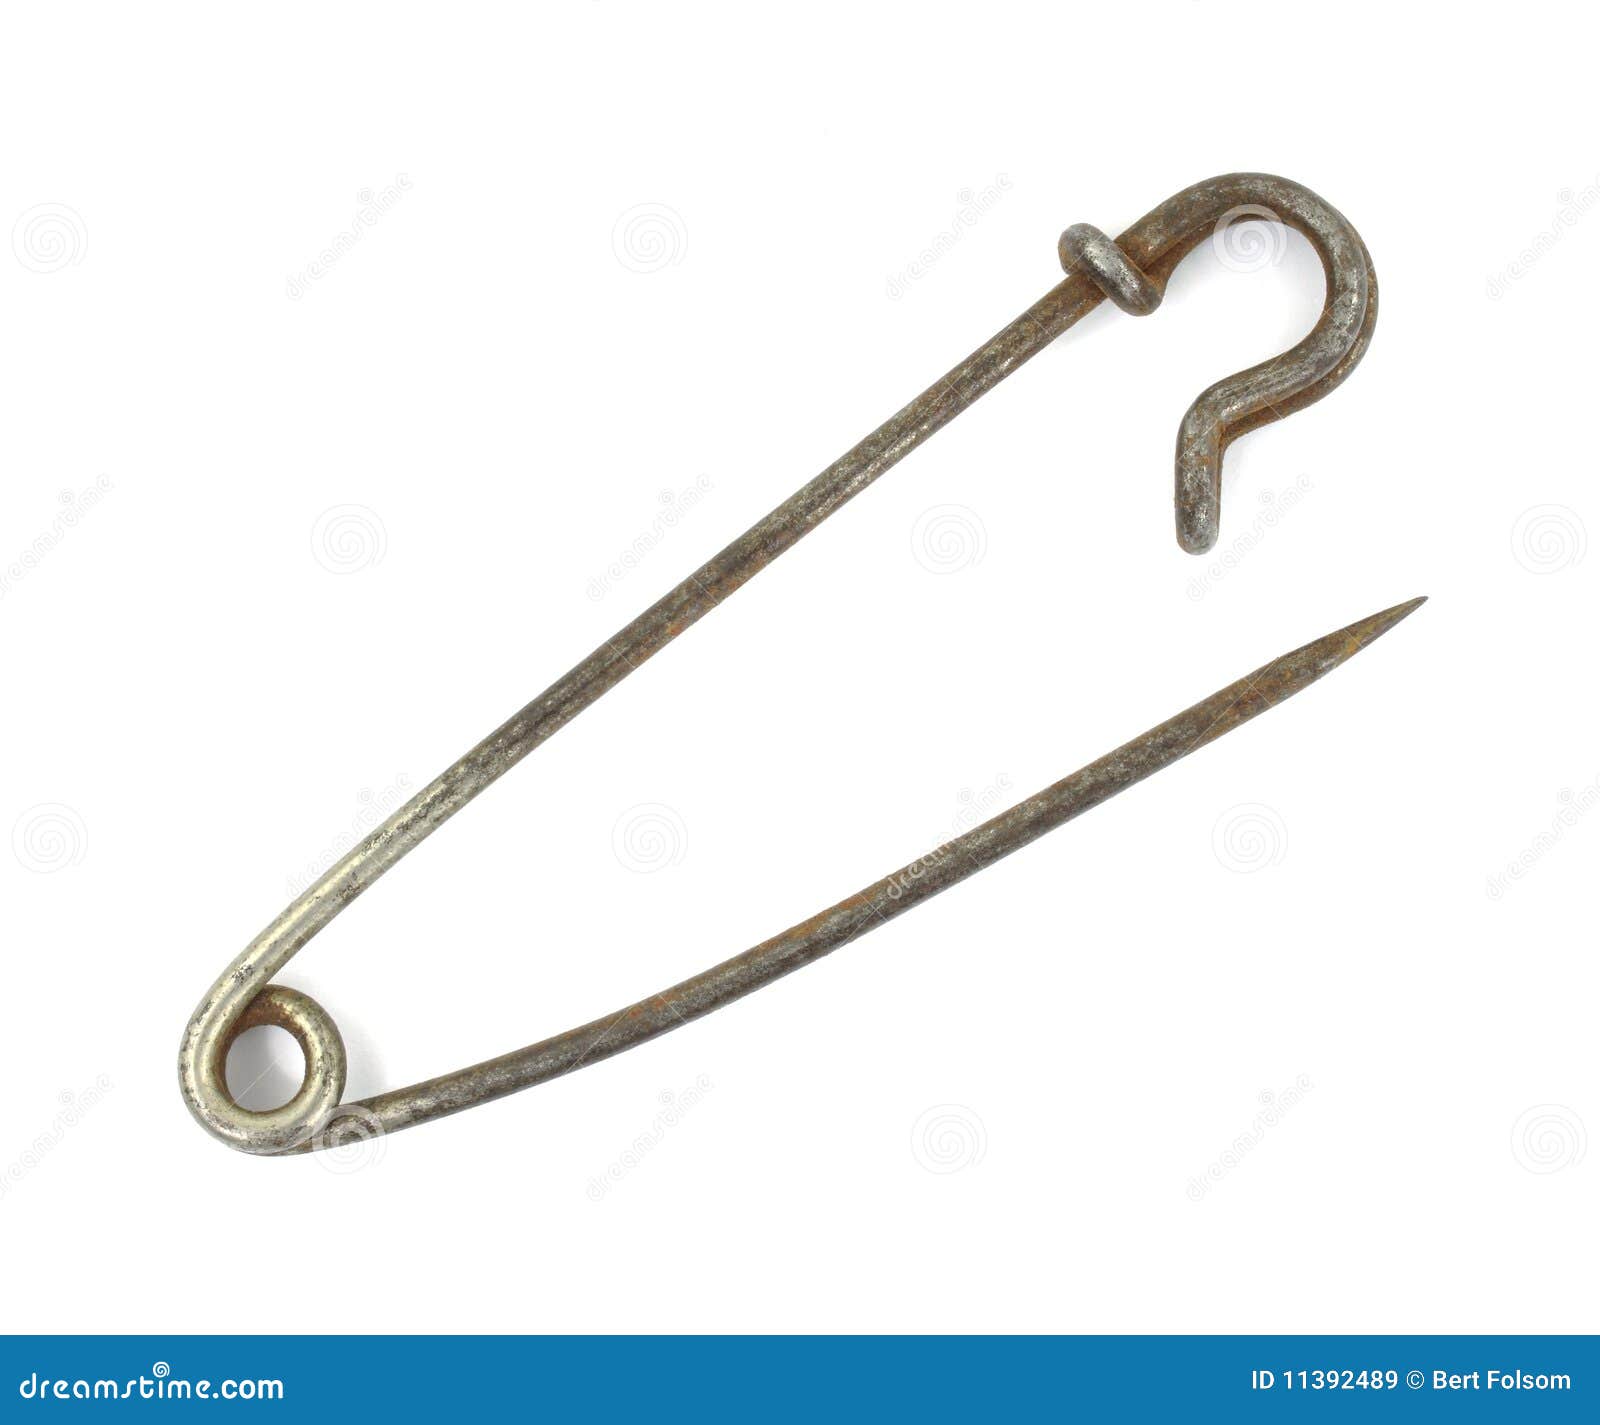 Noone Cloth Diaper Pins Stainless Steel Traditional Safety Pin (Asst)